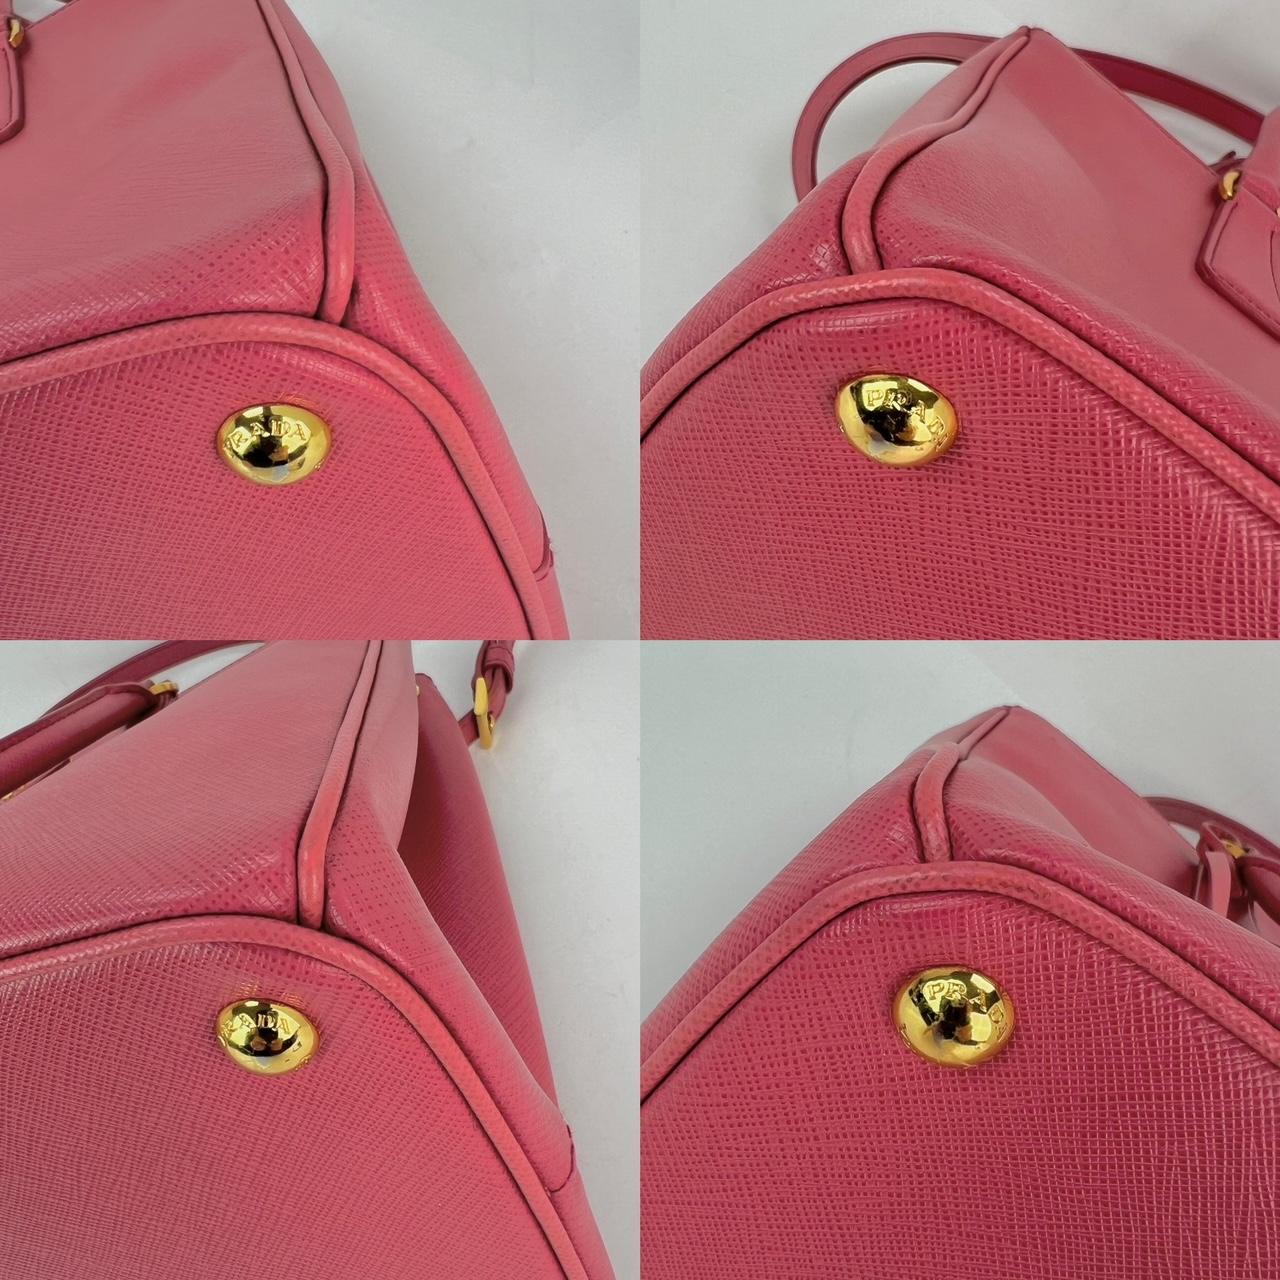 Prada Large Galleria Saffiano Leather Dark Pink Shoulder Bag In Excellent Condition For Sale In Freehold, NJ